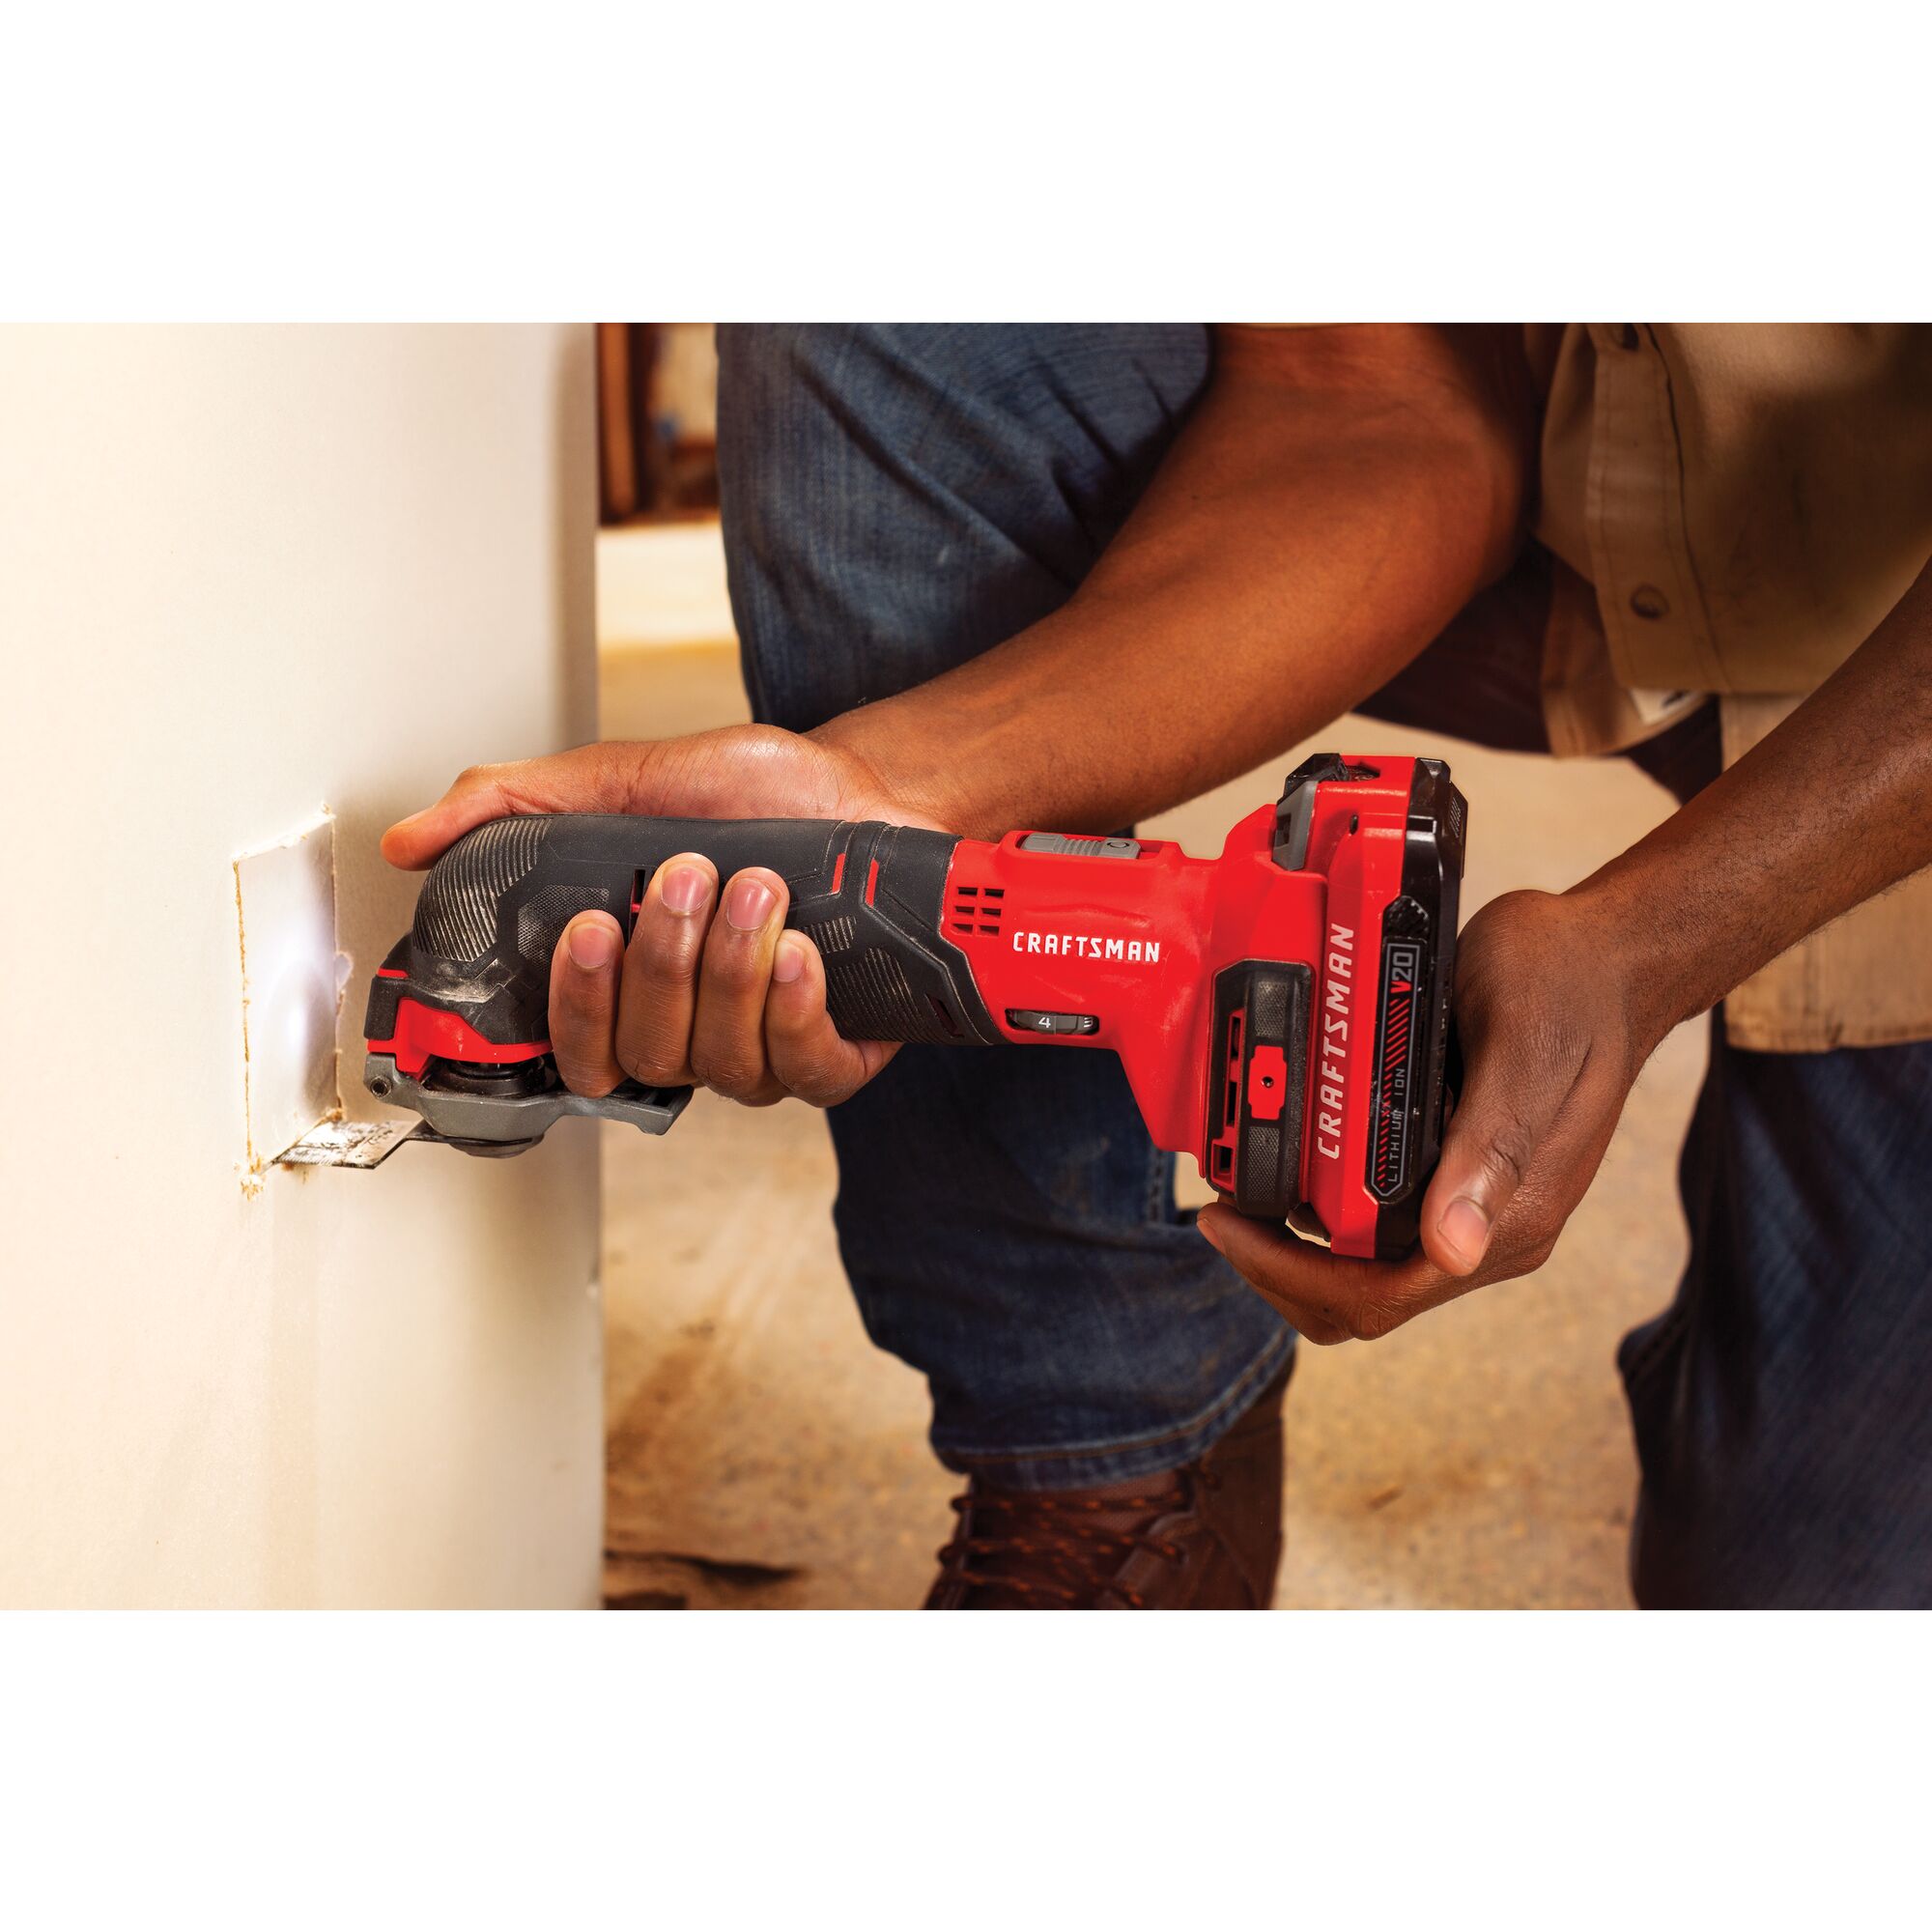 Cordless oscillating tool kit being used.